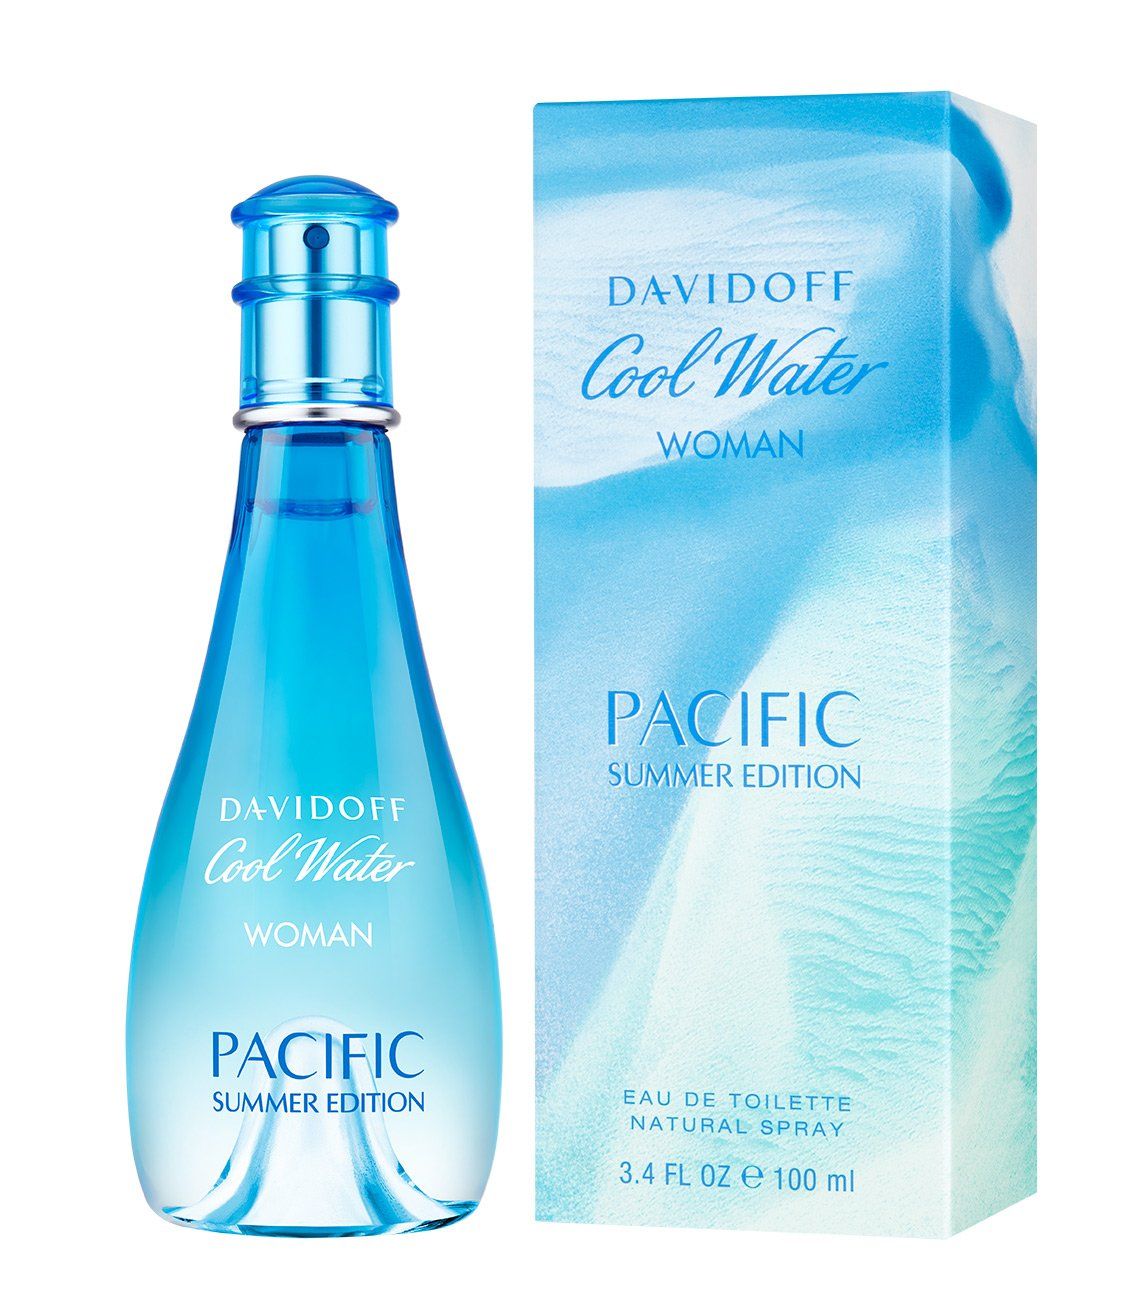 One of the most recent launches from the house of Davidoff, the Cool Water Woman Pacific Summer is a limited edition fragrance that comes in a gorgeous collector's bottle. Inspired by the ethereal aqua and floral fragrances of the ocean, this amazing perfume reminds you of the exotic summers, the enigmatic coral reefs and the luscious marine flora and fauna. The Cool Water Pacific Summer incorporates a lingering scent, perfect for all day wear.<br><br>SCENT<br>Top Notes are mandarine, pear, mint, pineapple, melon<br>Middle Notes are rose, violet, lily of the valley, bamboo, jasmine<br>Base Notes are cashmeran, sandalwood, orris root, peach